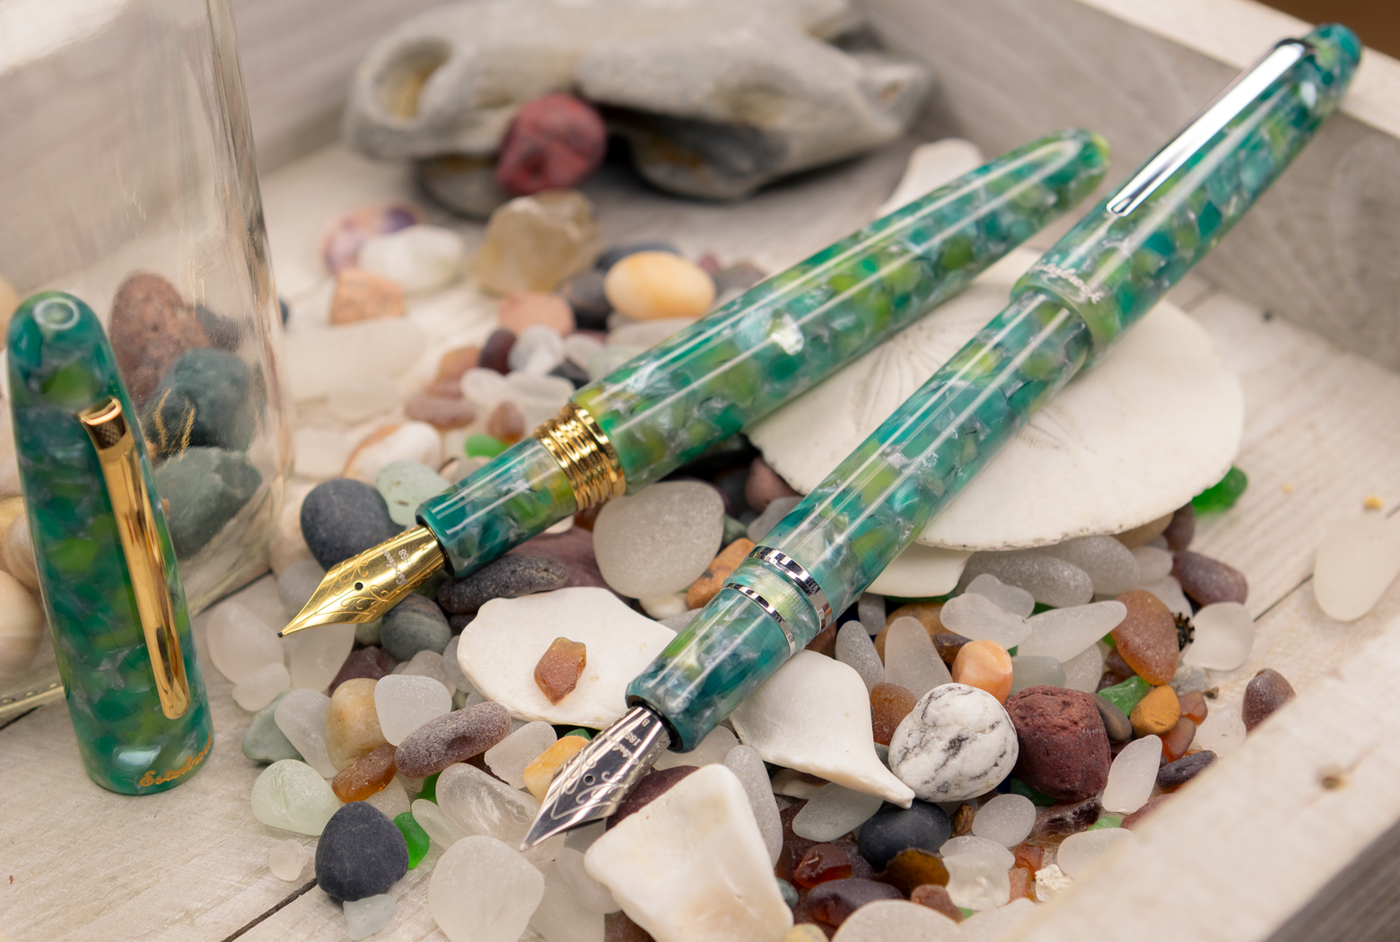 The Esterbrook Pen Company, a true American Original, is rewriting its long success story in modern times with a fresh new pen collection based on a complete rebranding.